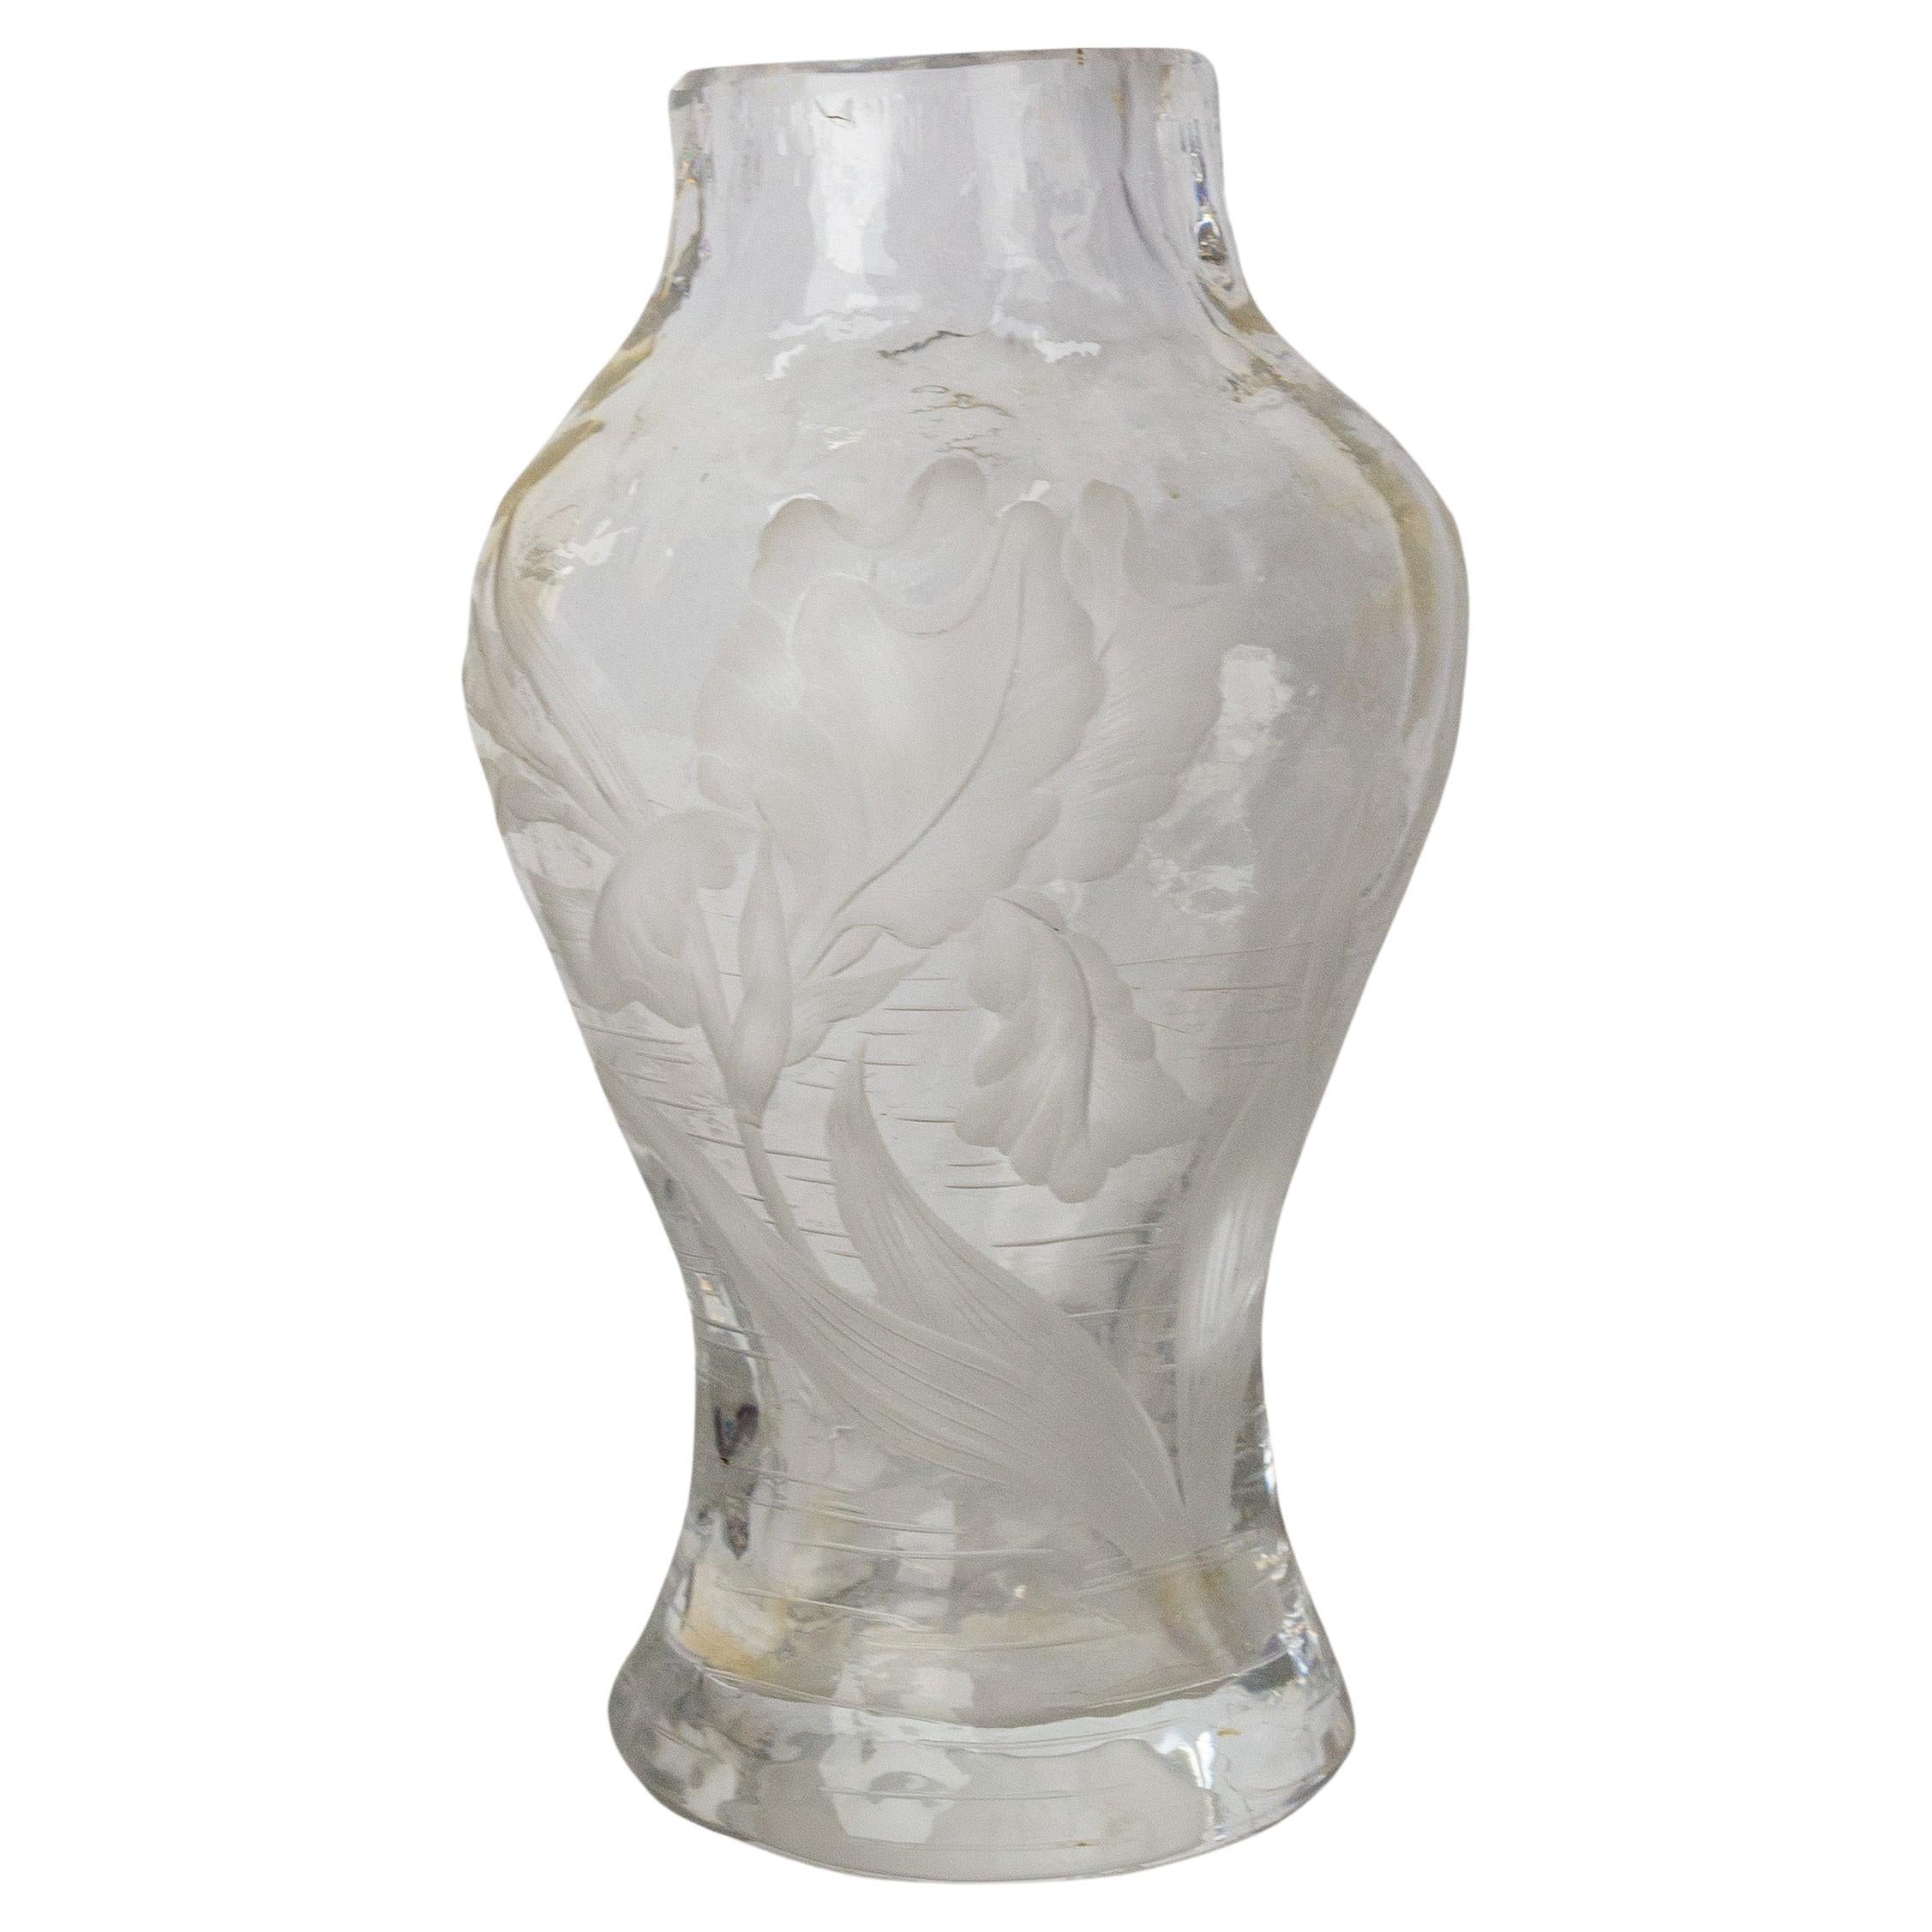 French art nouveau glass vase
An iris is engraved in the foreground of a lacustrine decoration.
Iris is one of the typical flowers of art nouveau representations
Irregular vase neck and foot, typical of Art Nouveau.
Maison Edmond Enot (see the